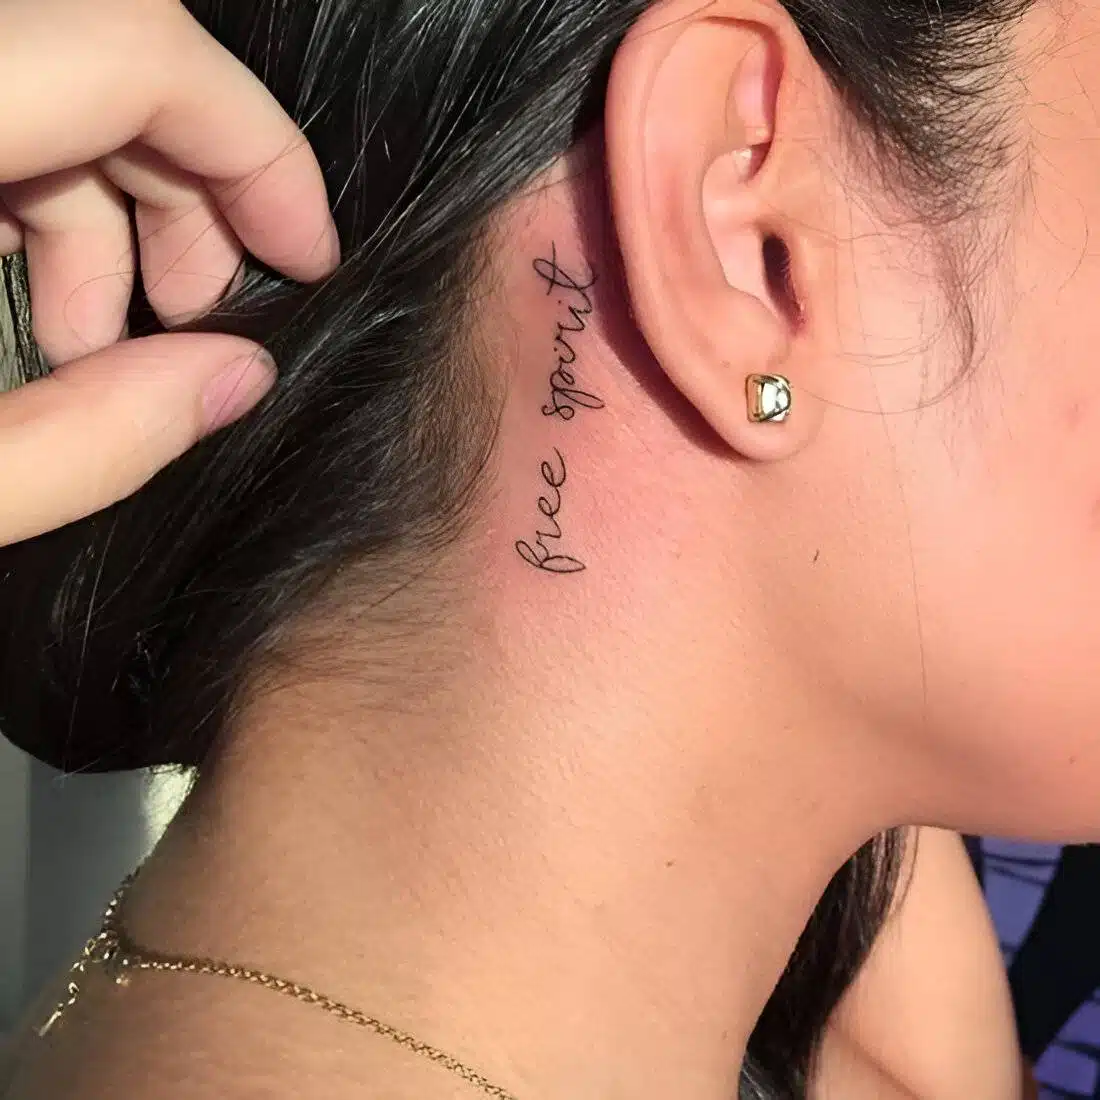 25 Low-key Stunning Behind The Ear Tattoos To Get ASAP - 177